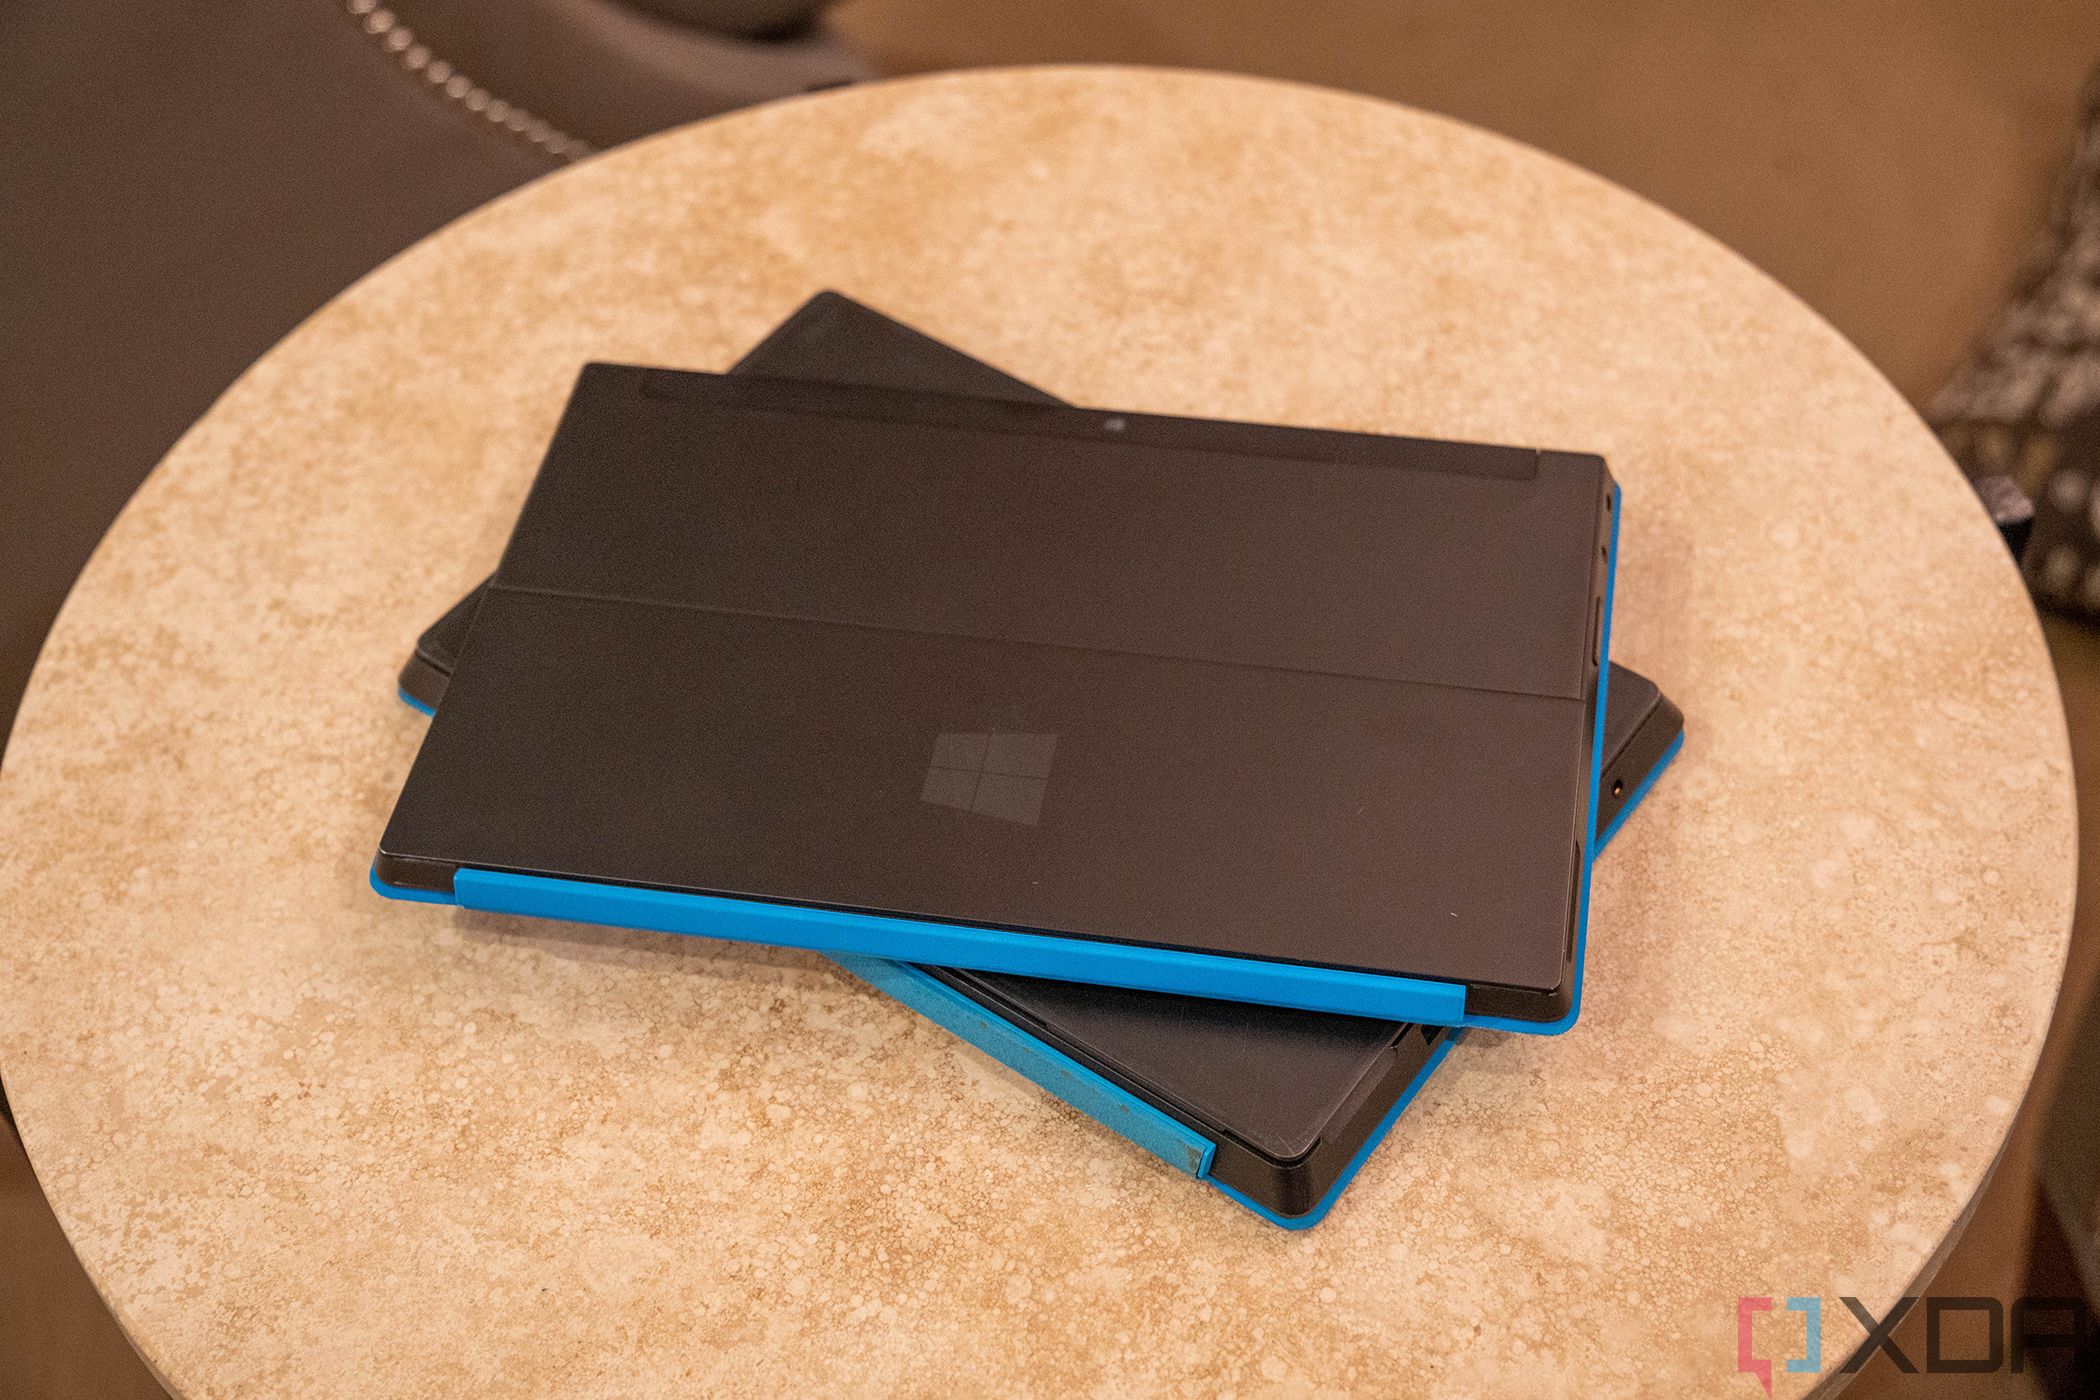 Original Surface RT and Surface Pro